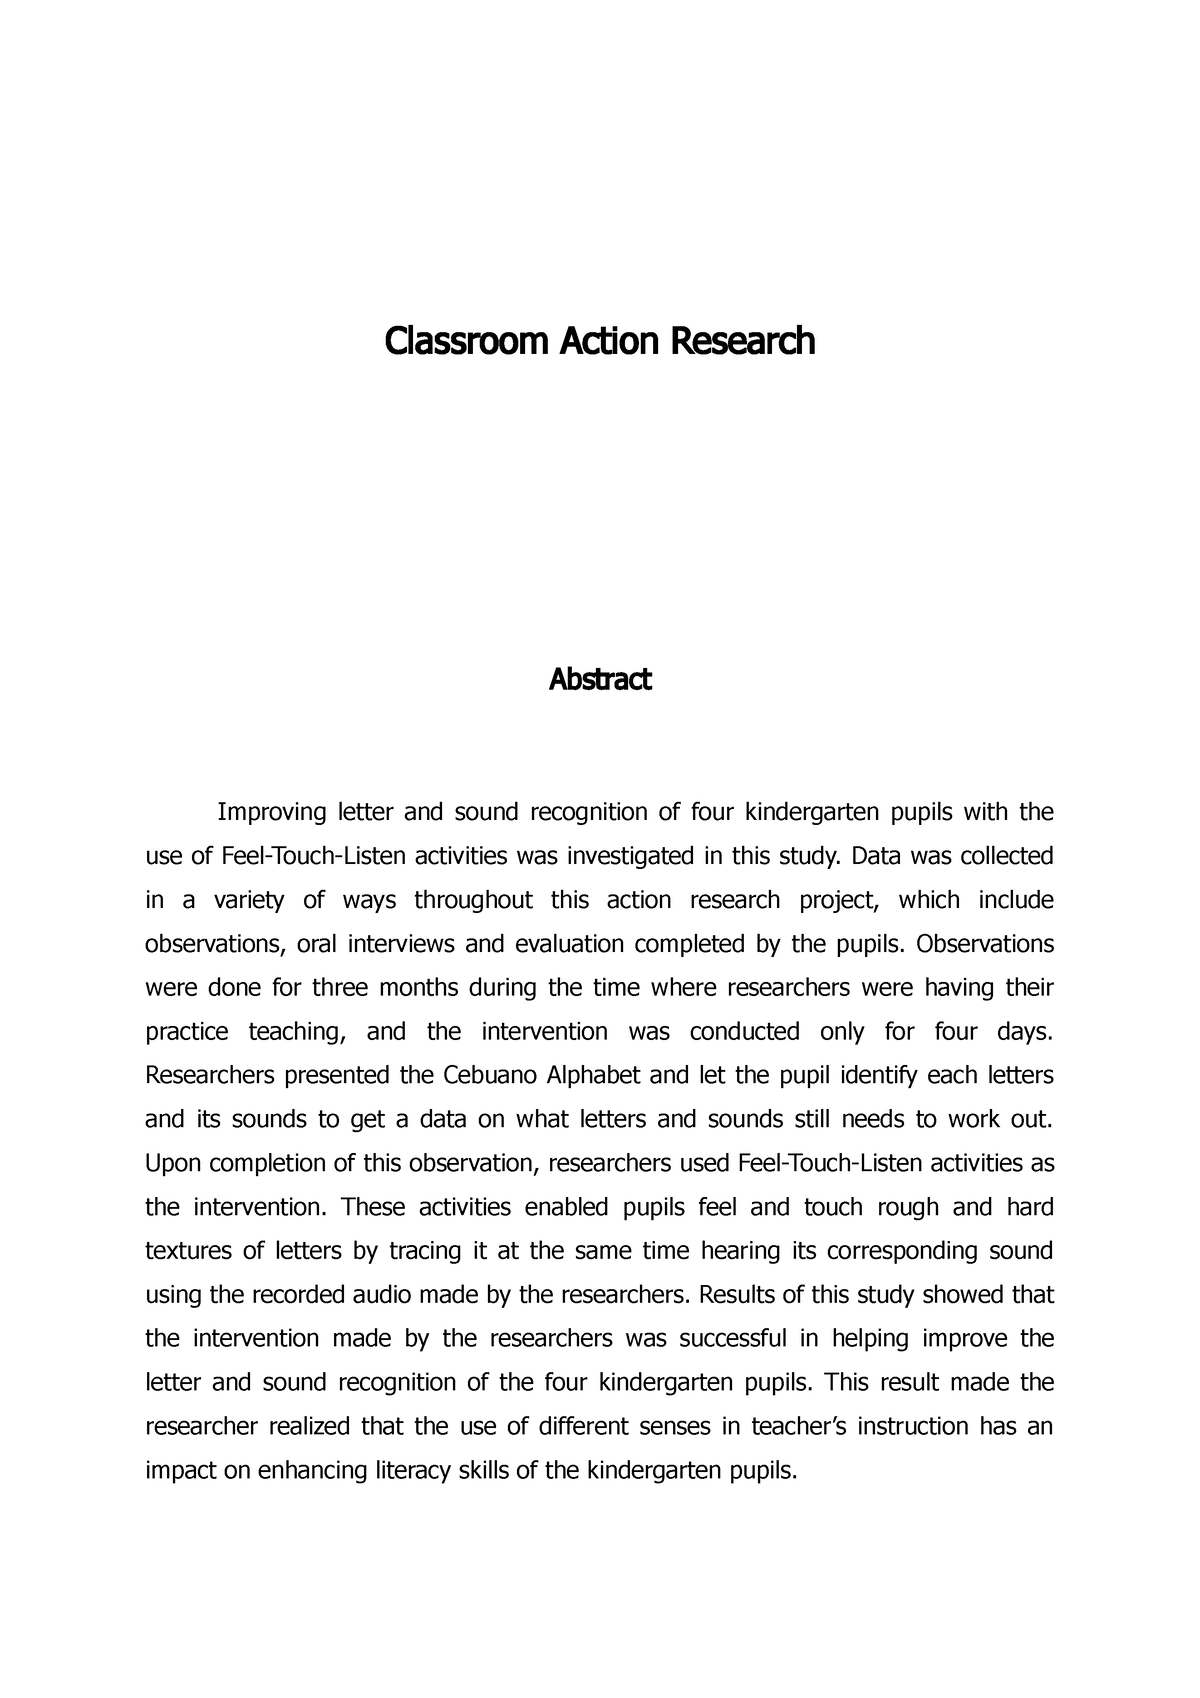 sample of action research proposal in reading